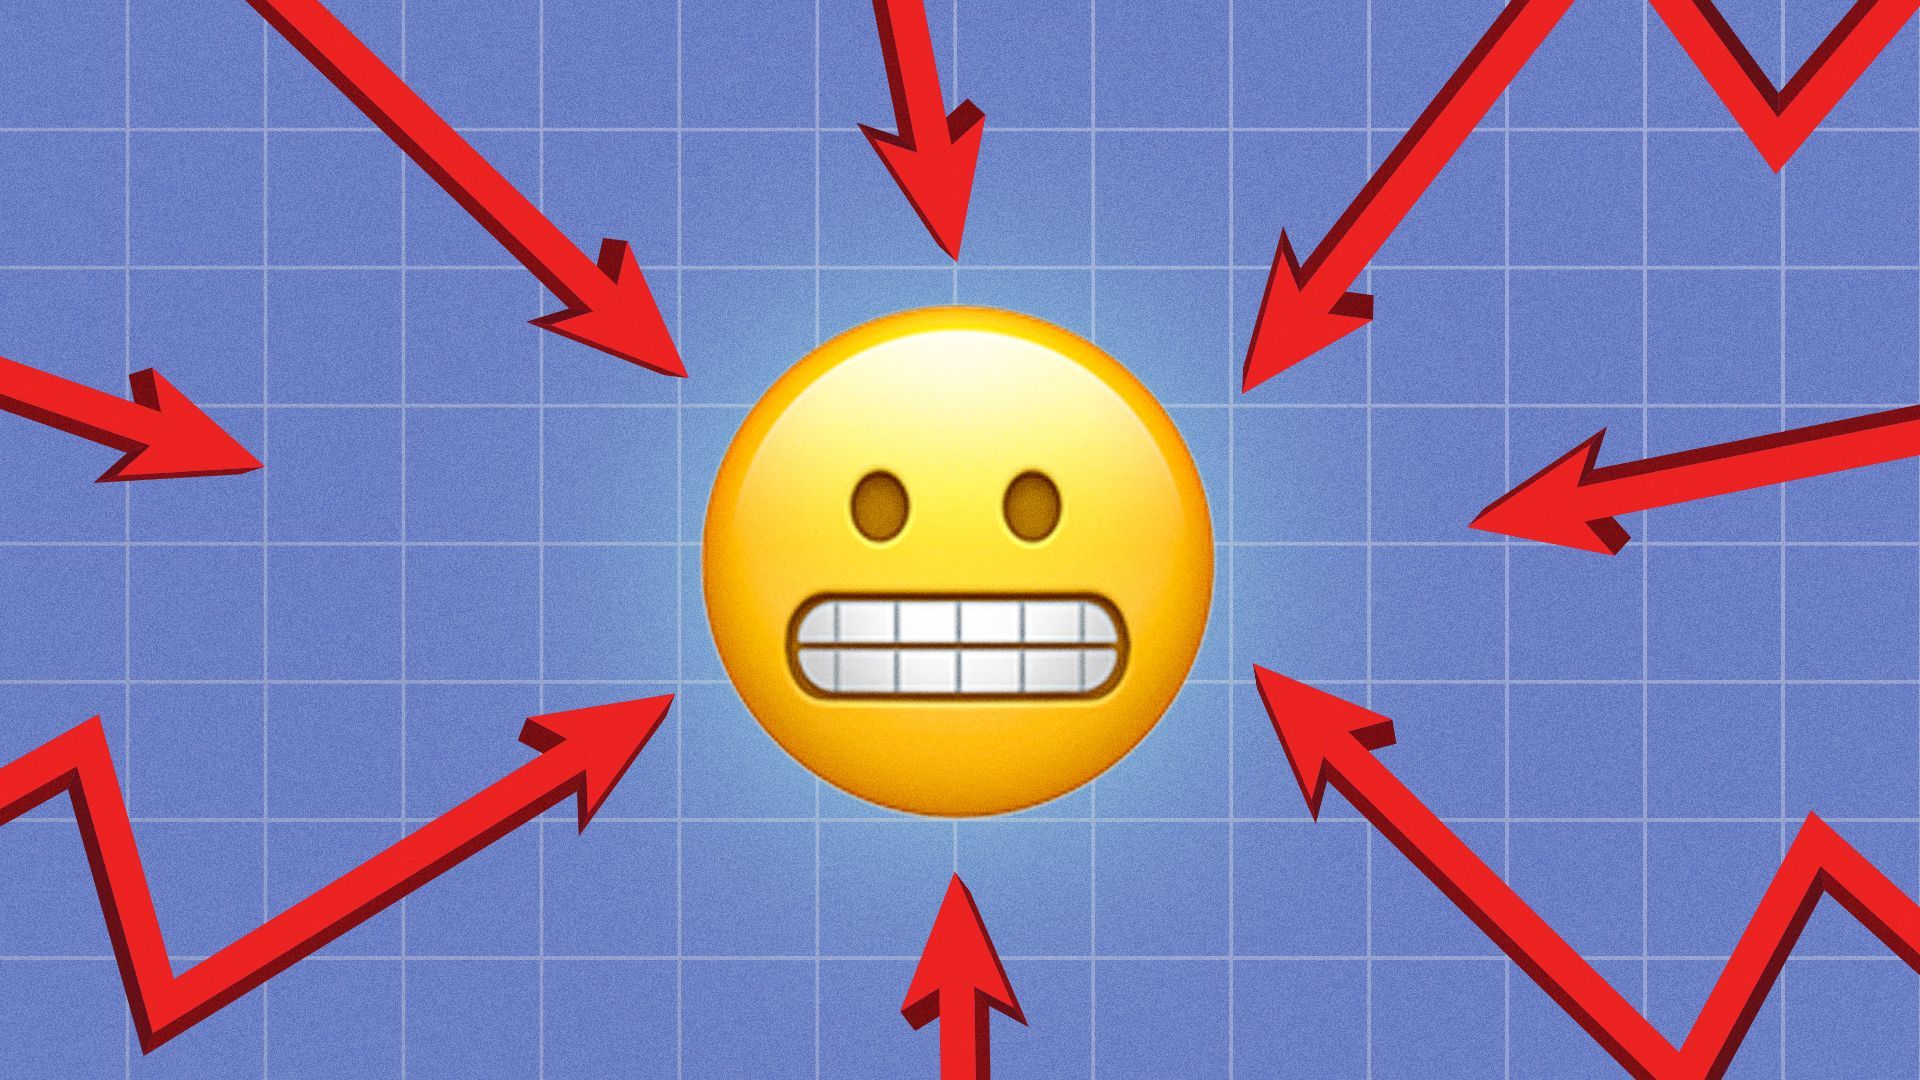 Illustration of a grimacing face emoji surrounded by angry market trend arrows.